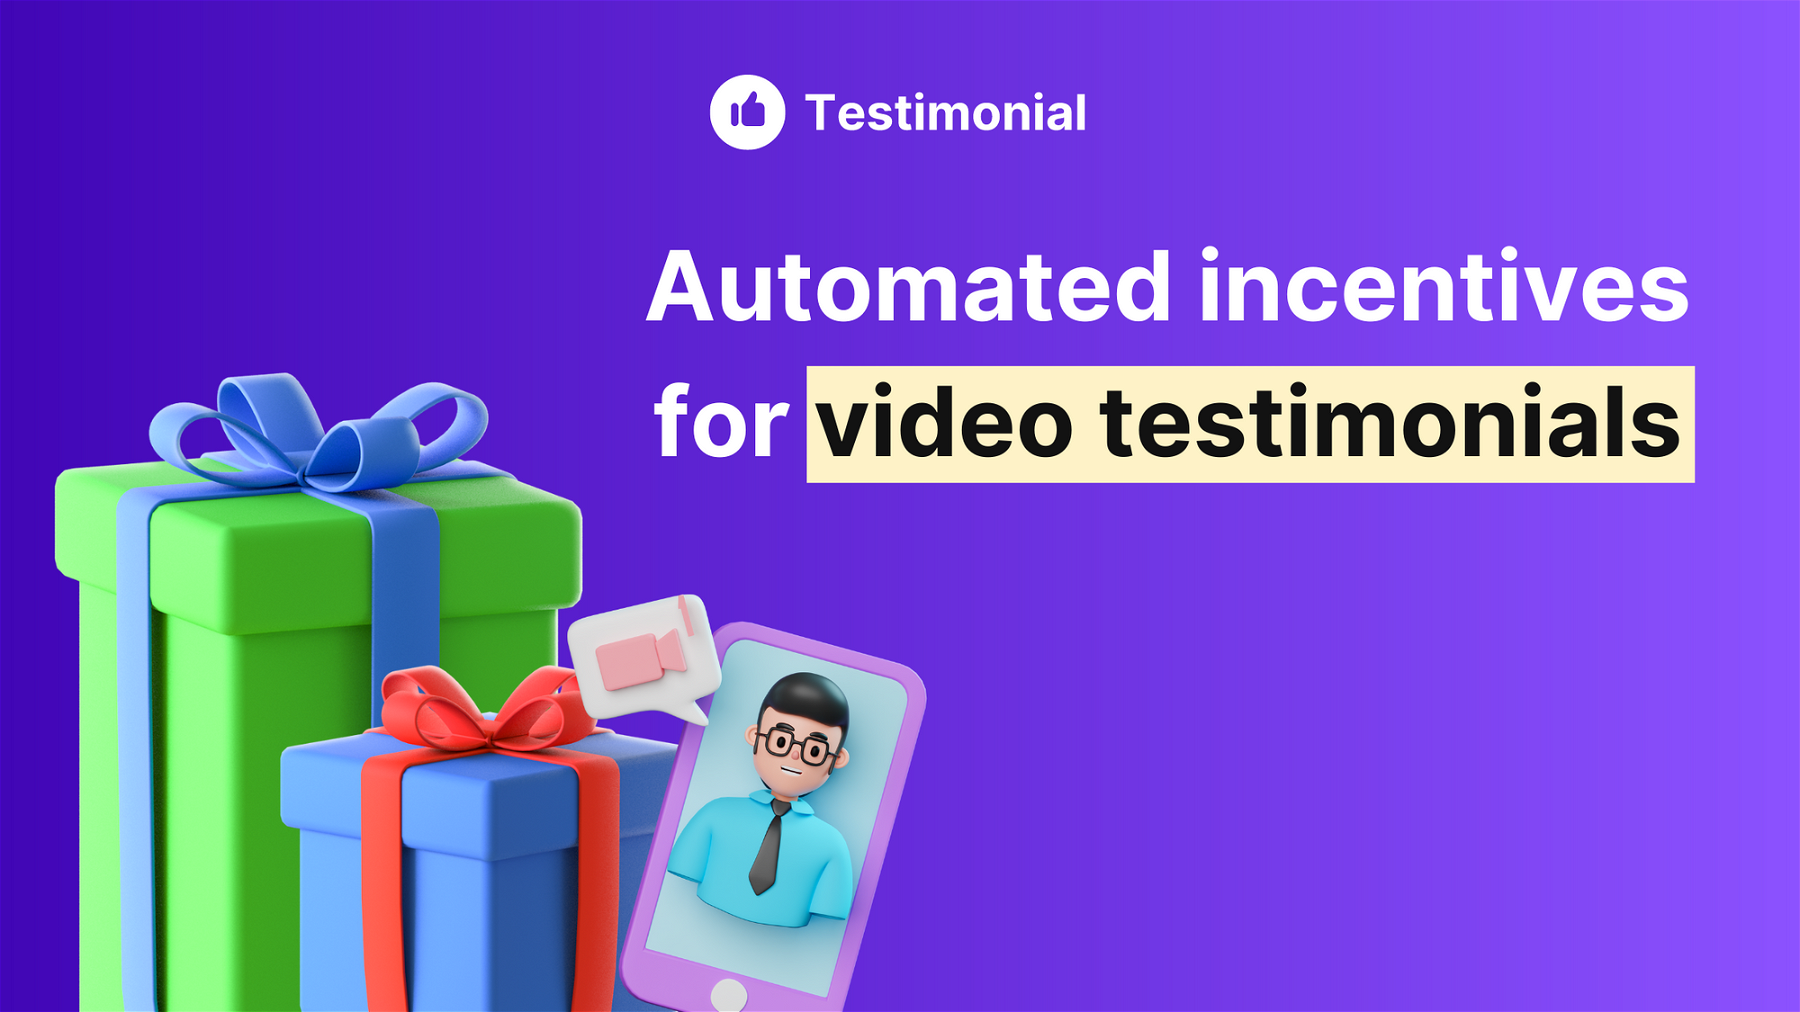 5 ways to collect more testimonials by using automated incentives